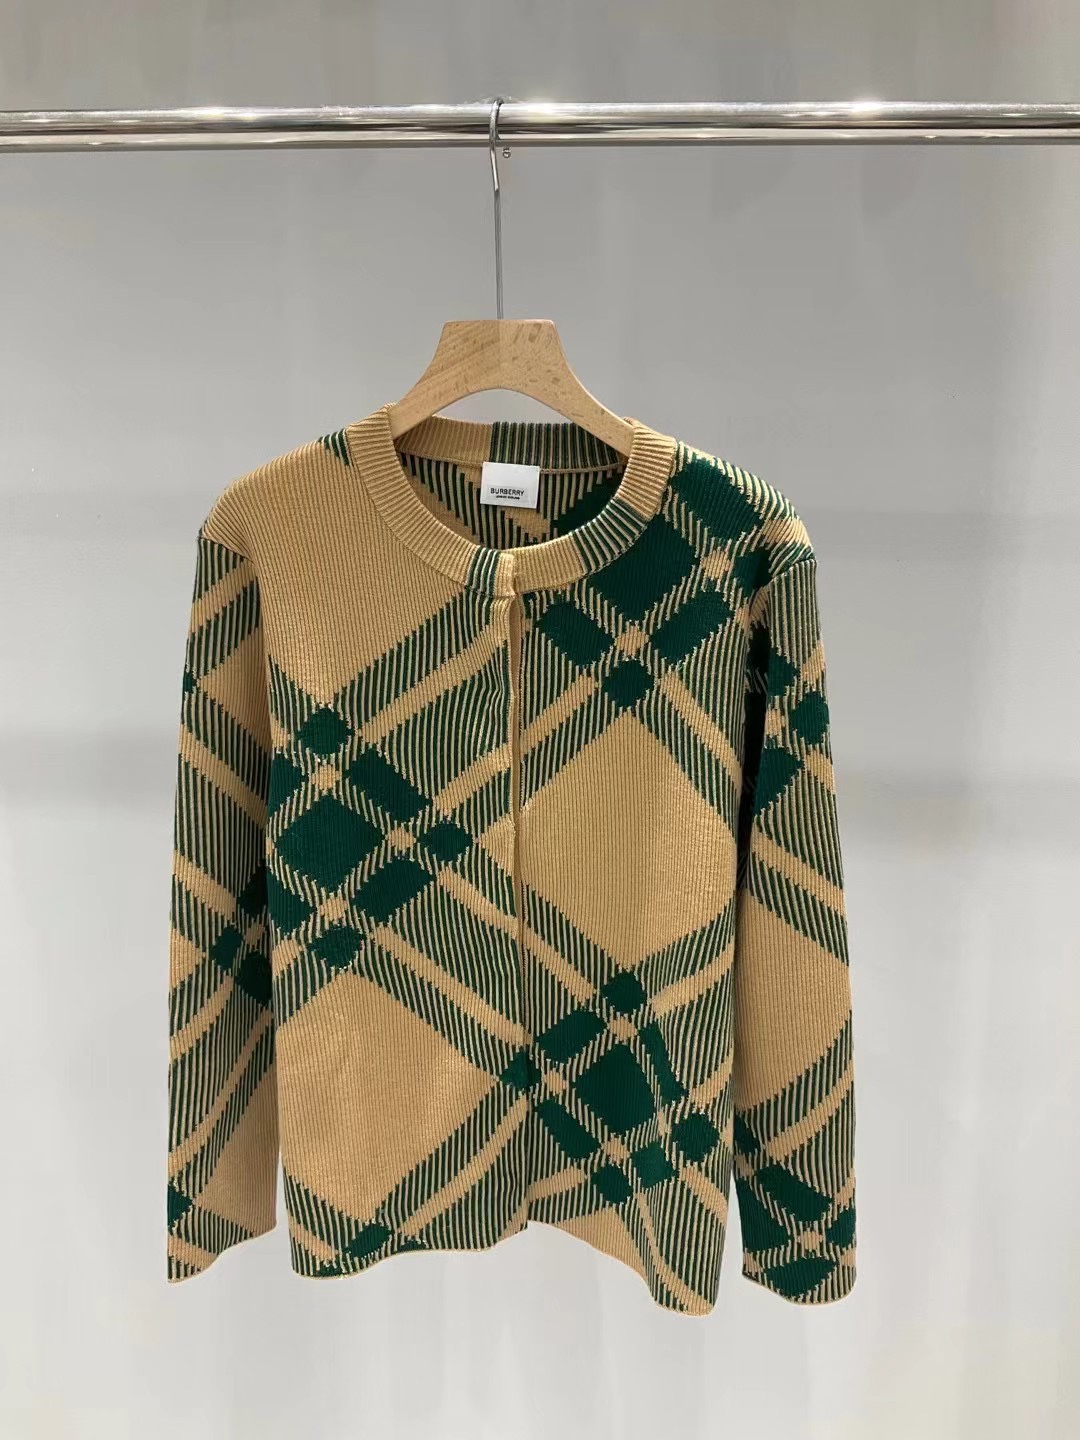 Burberry Clothing Cardigans Knit Sweater Knitting Wool Spring Collection